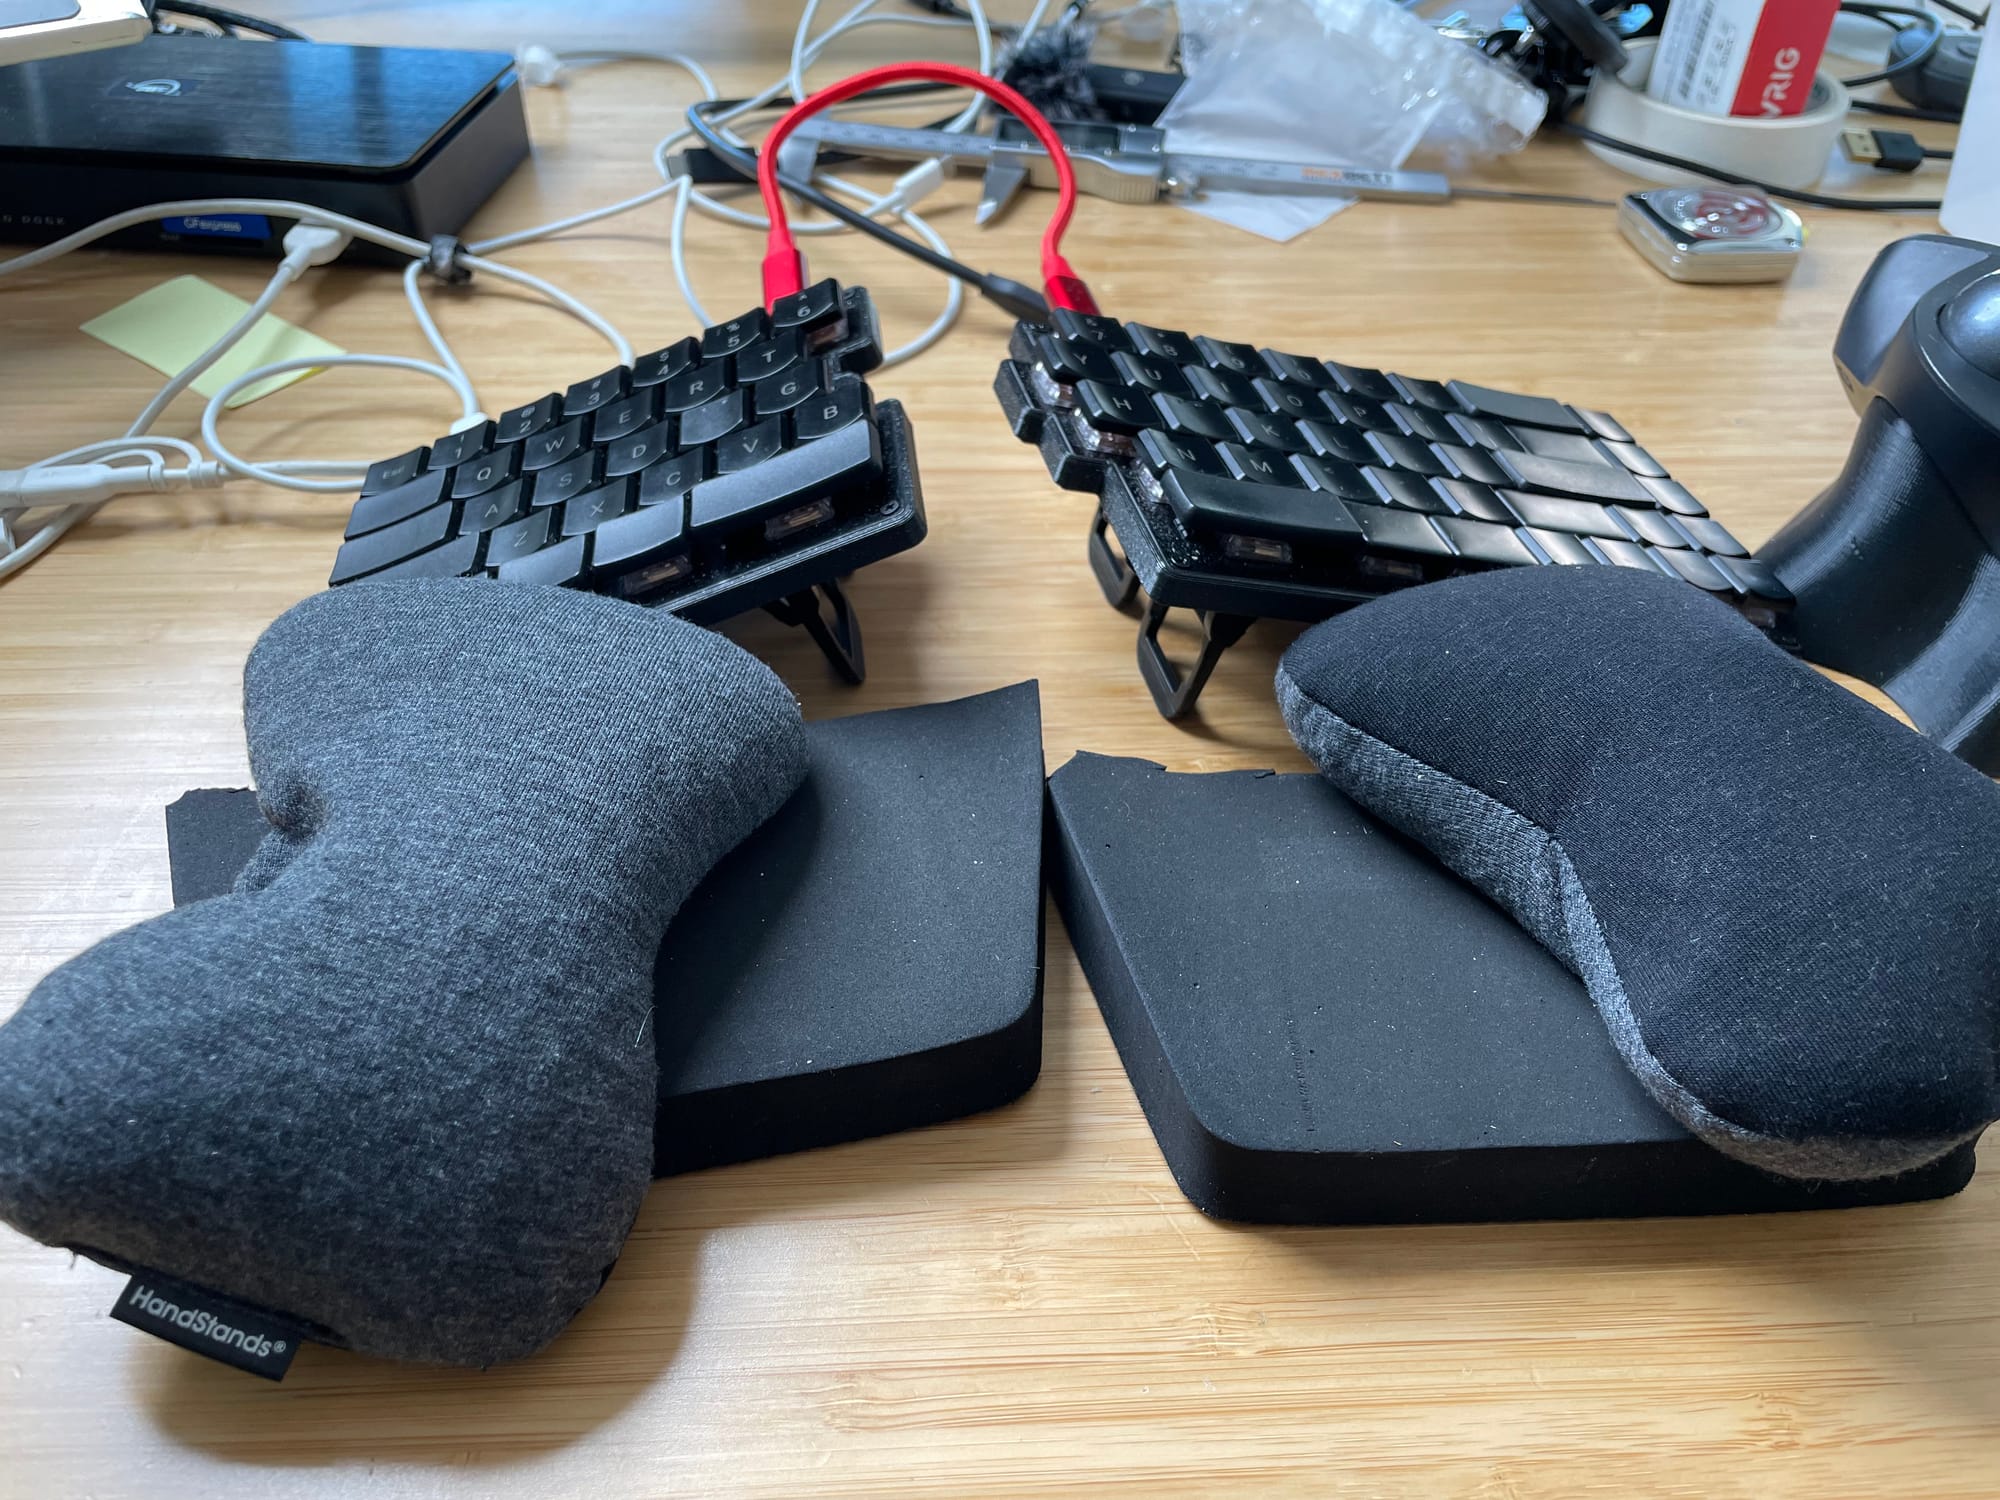 Simple tenting solutions for ergonomic keyboards